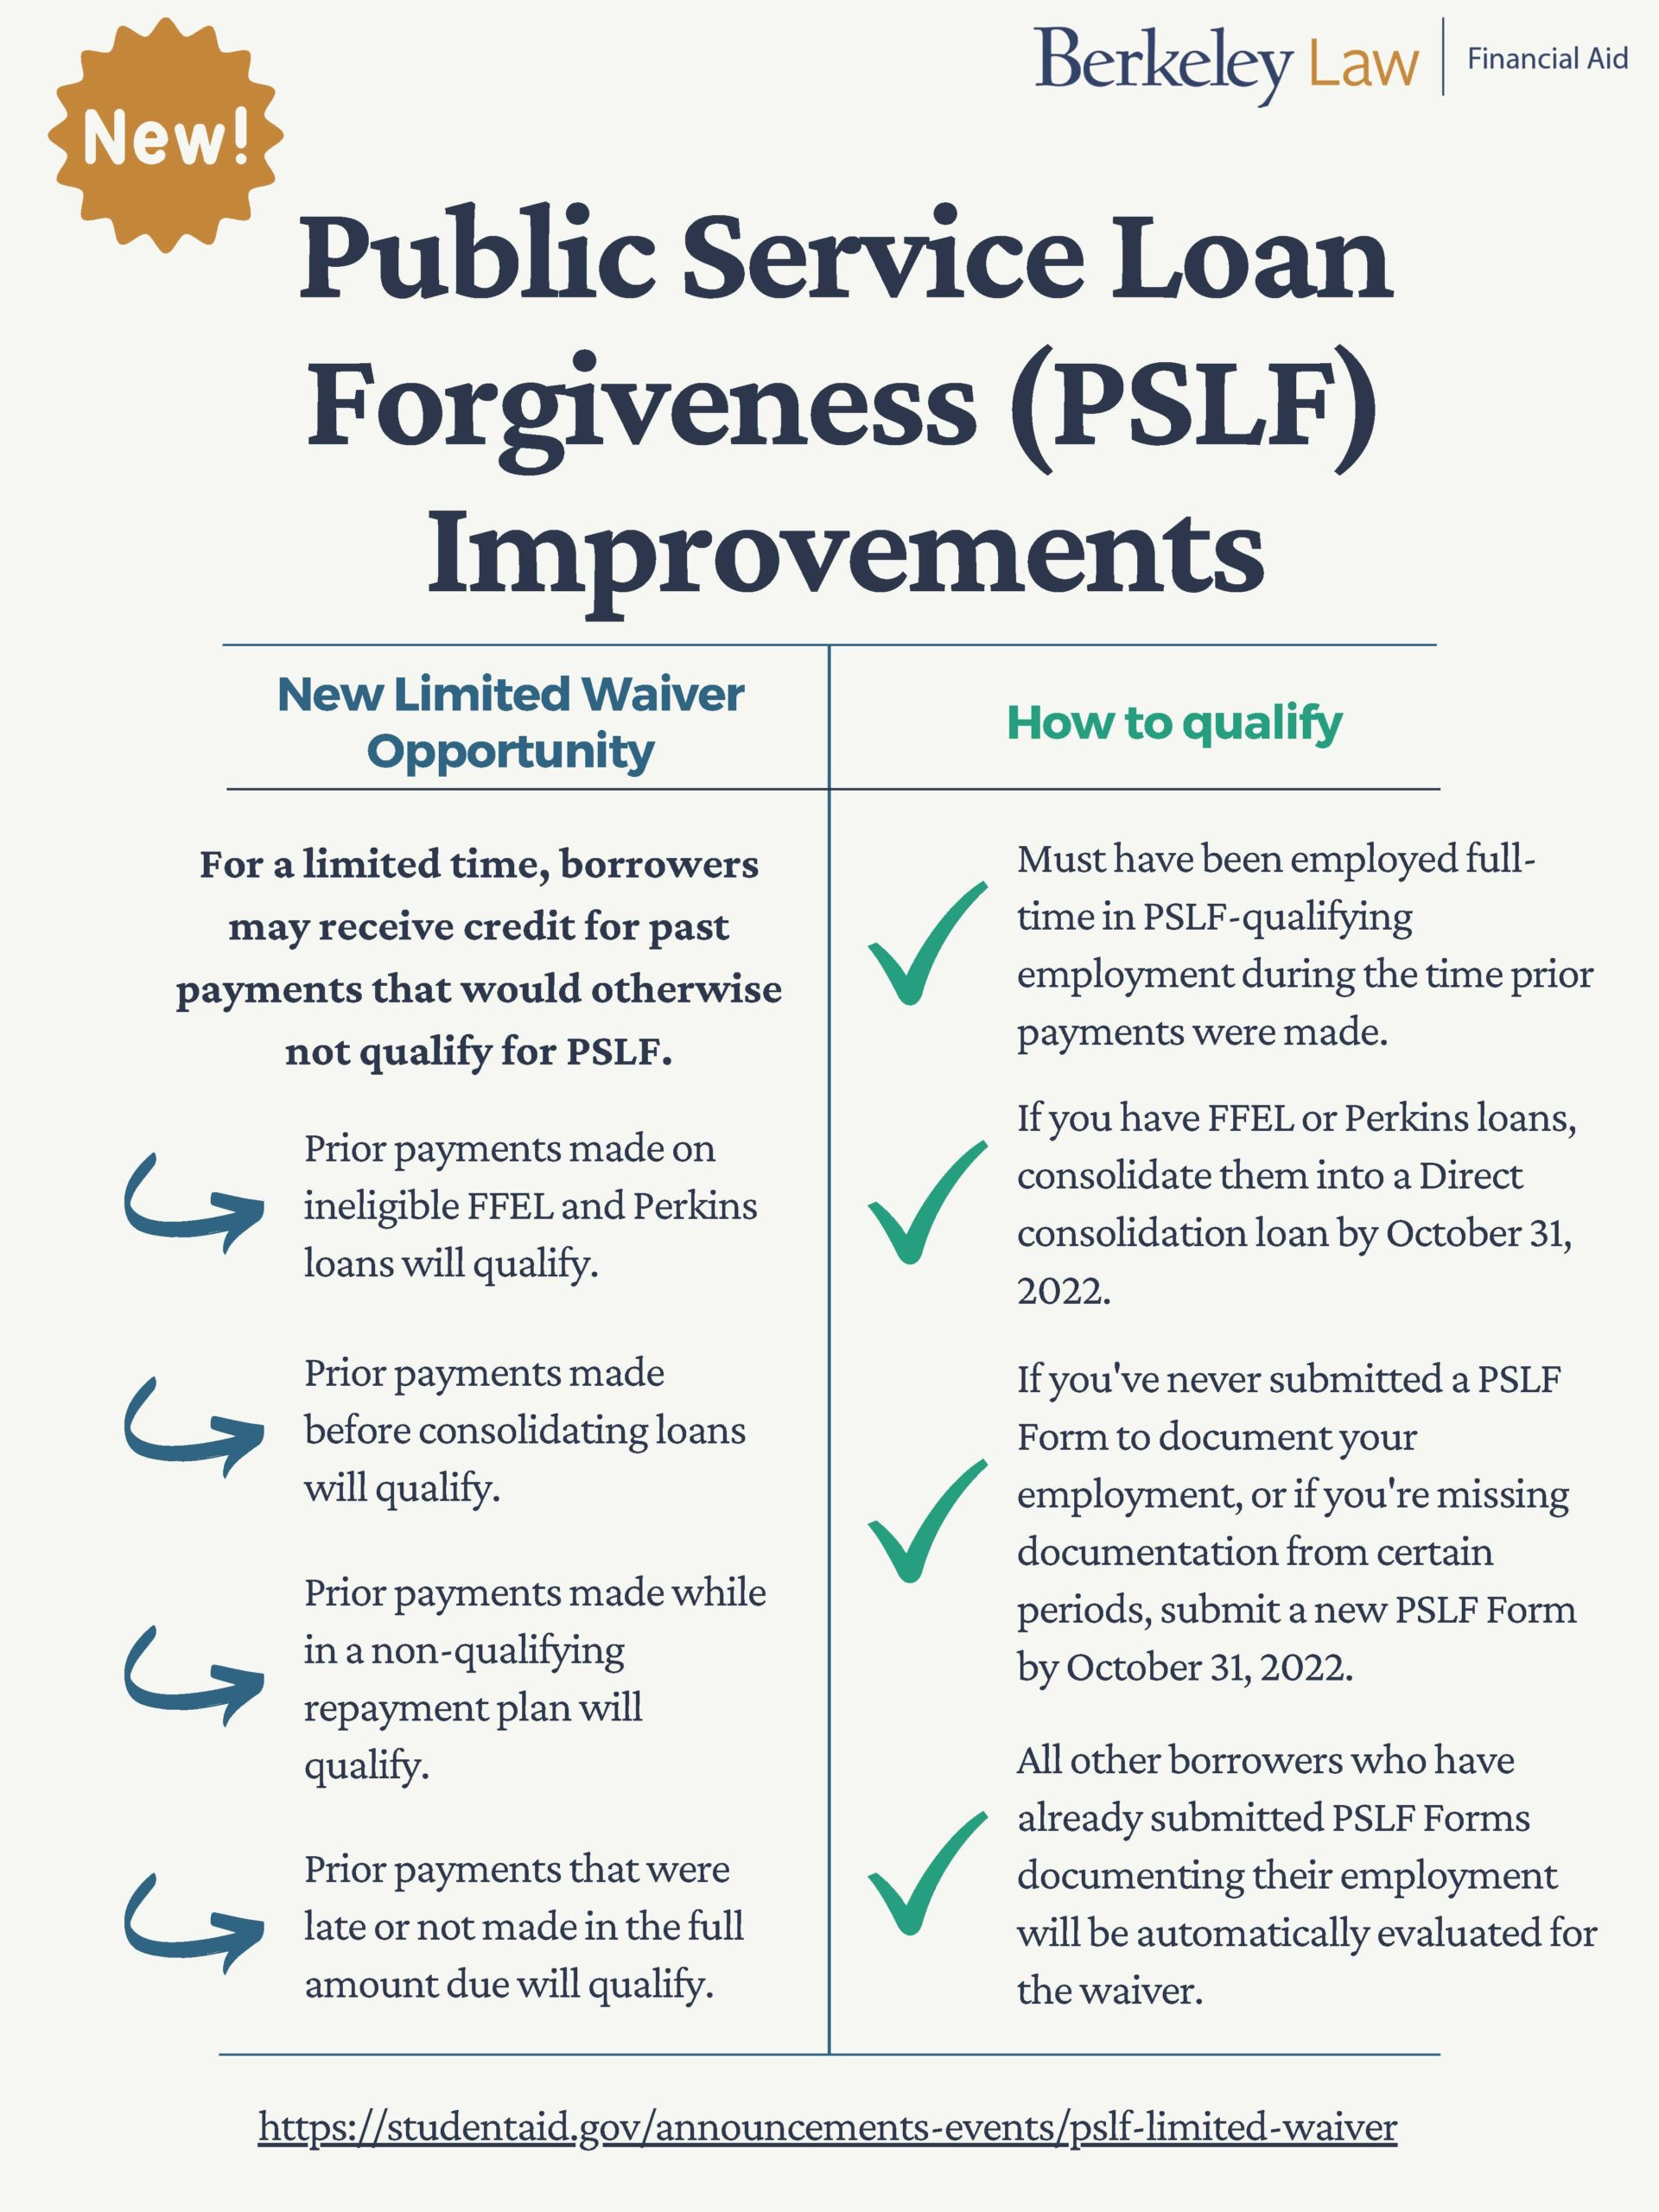 An image describing the temporary changes to PSLF as part of the limited PSLF waiver. Borrowers may receive credit for past periods of repayment on loans that otherwise would not qualify for PSLF. Borrowers may need to consolidate their loans to qualify or apply for a different repayment plan.